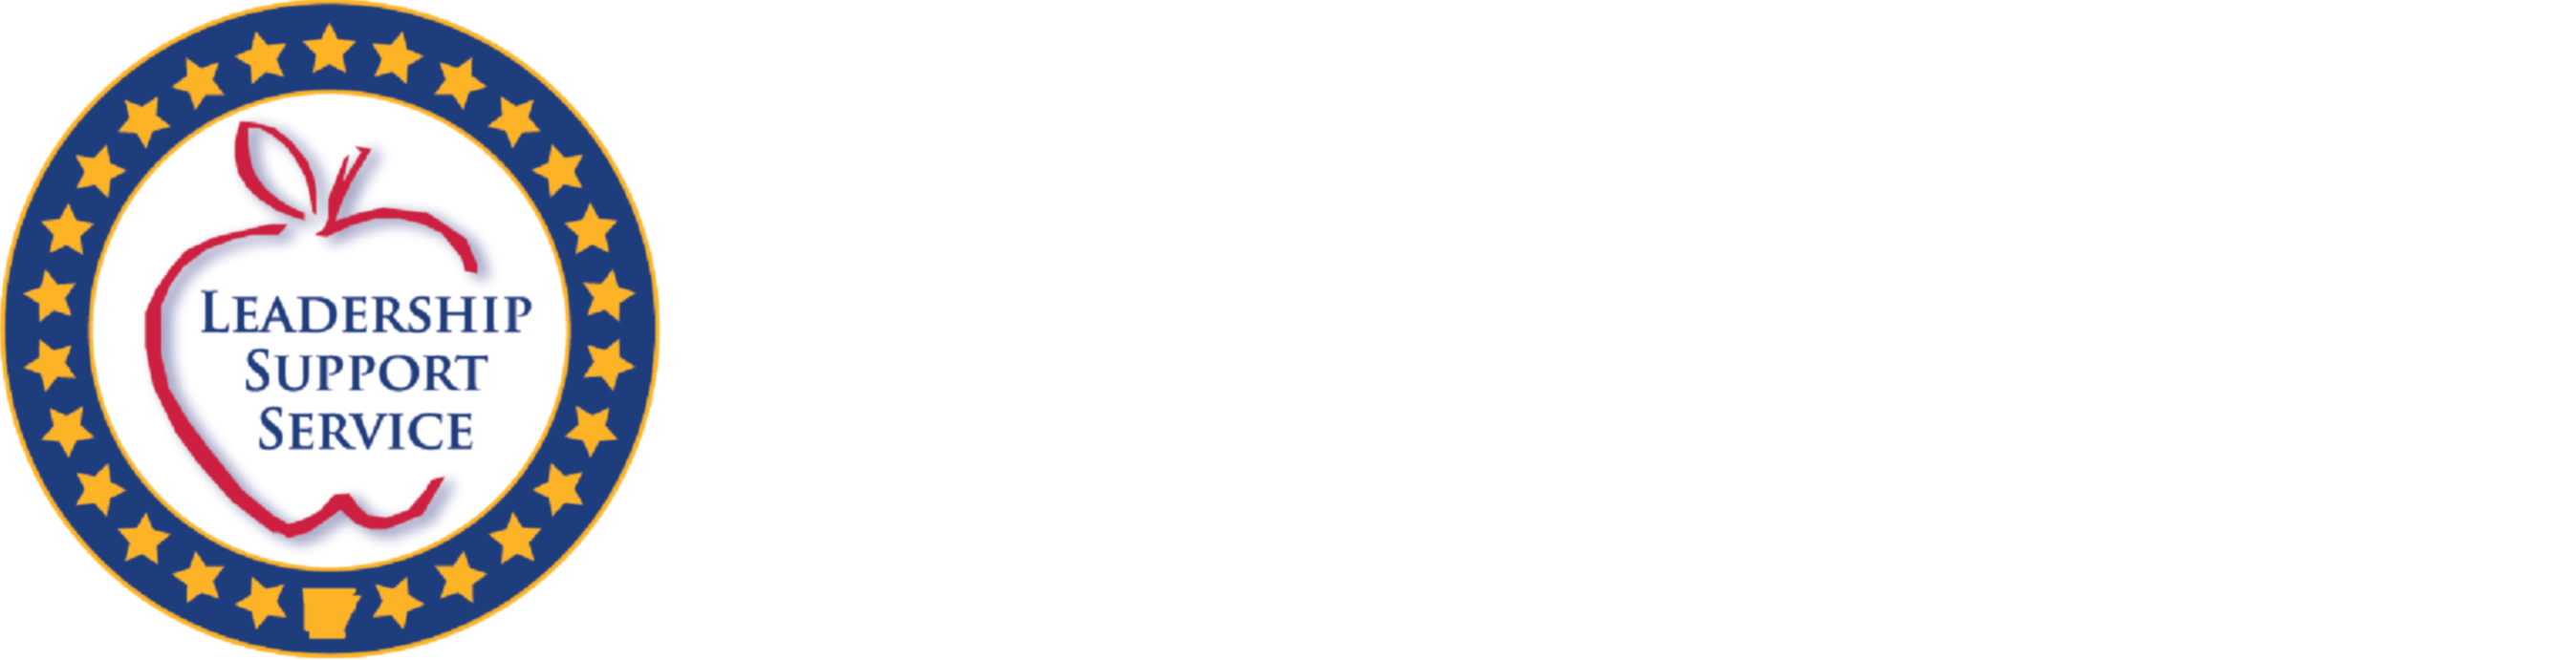 Division of Elementary and Secondary Education State Required Information